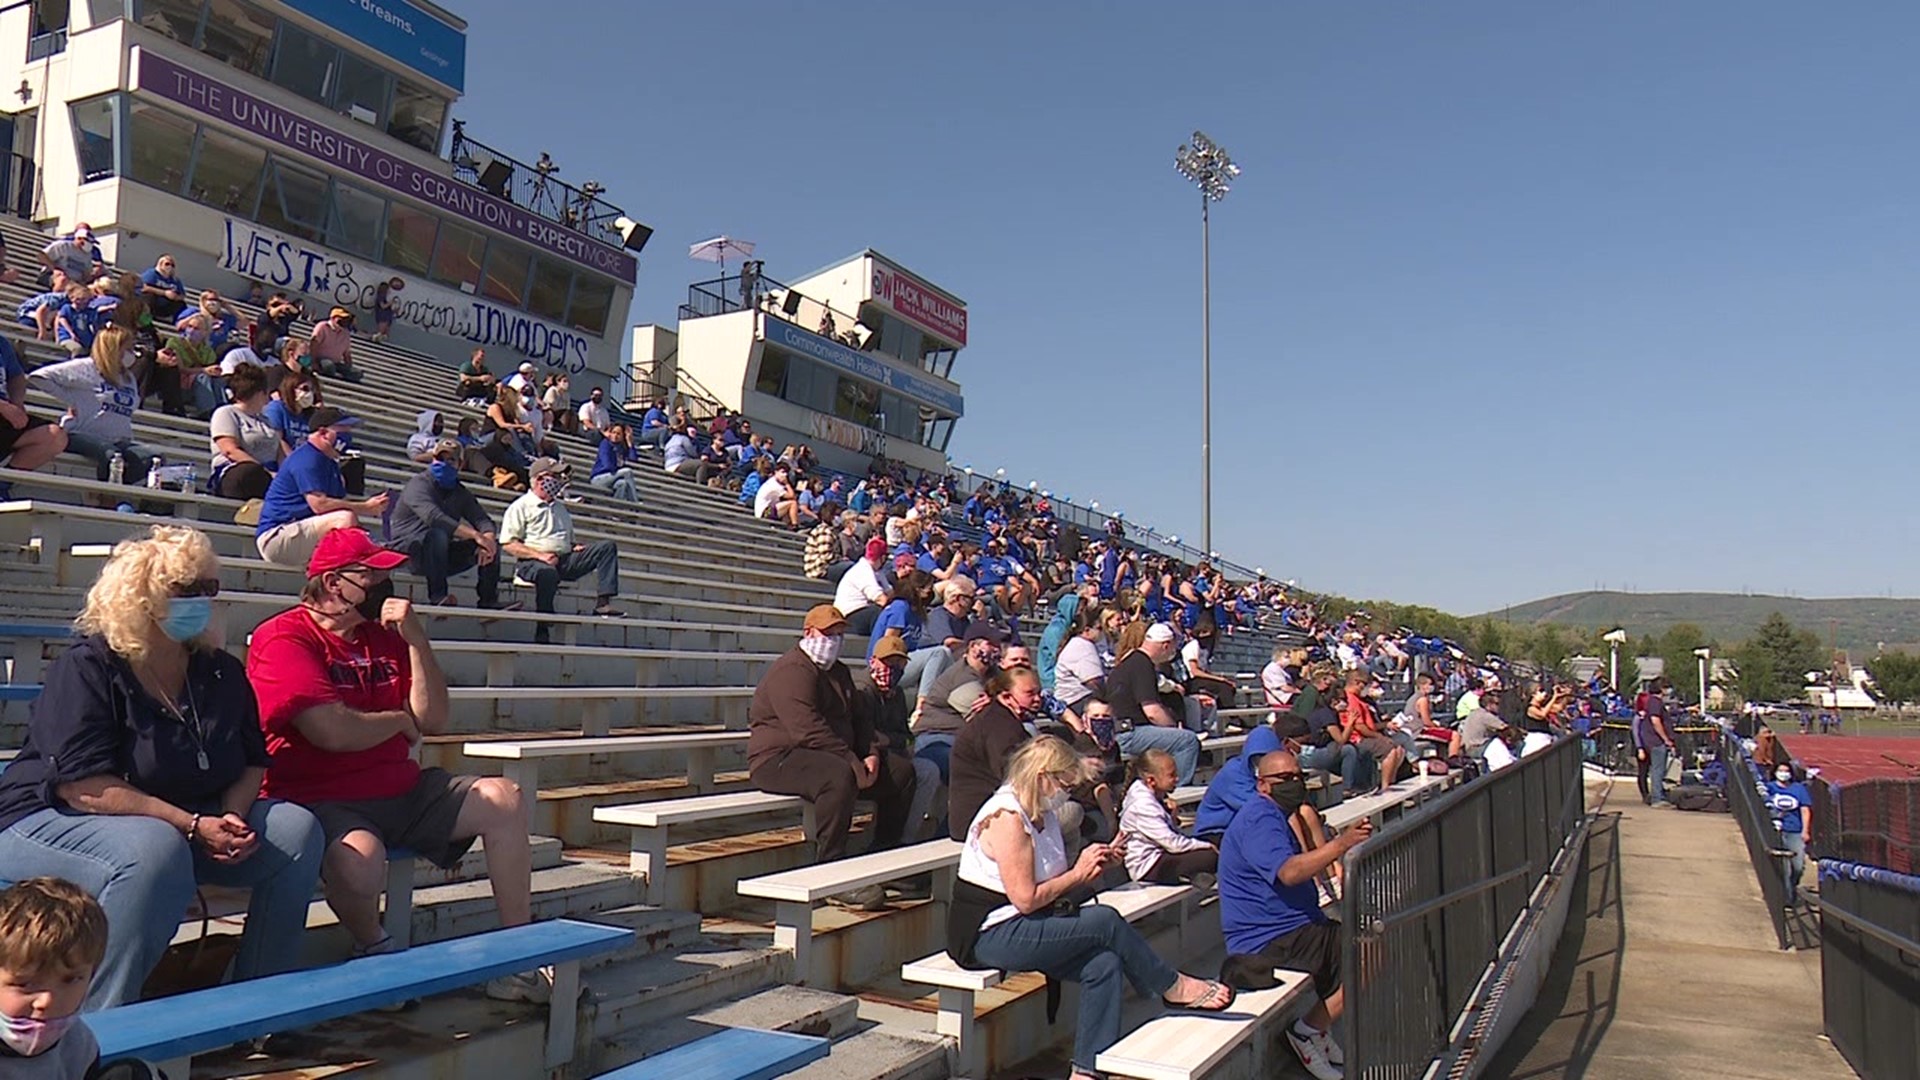 A recent change in state guidelines meant the school district could issue tickets for 20 percent of the stadium's capacity.